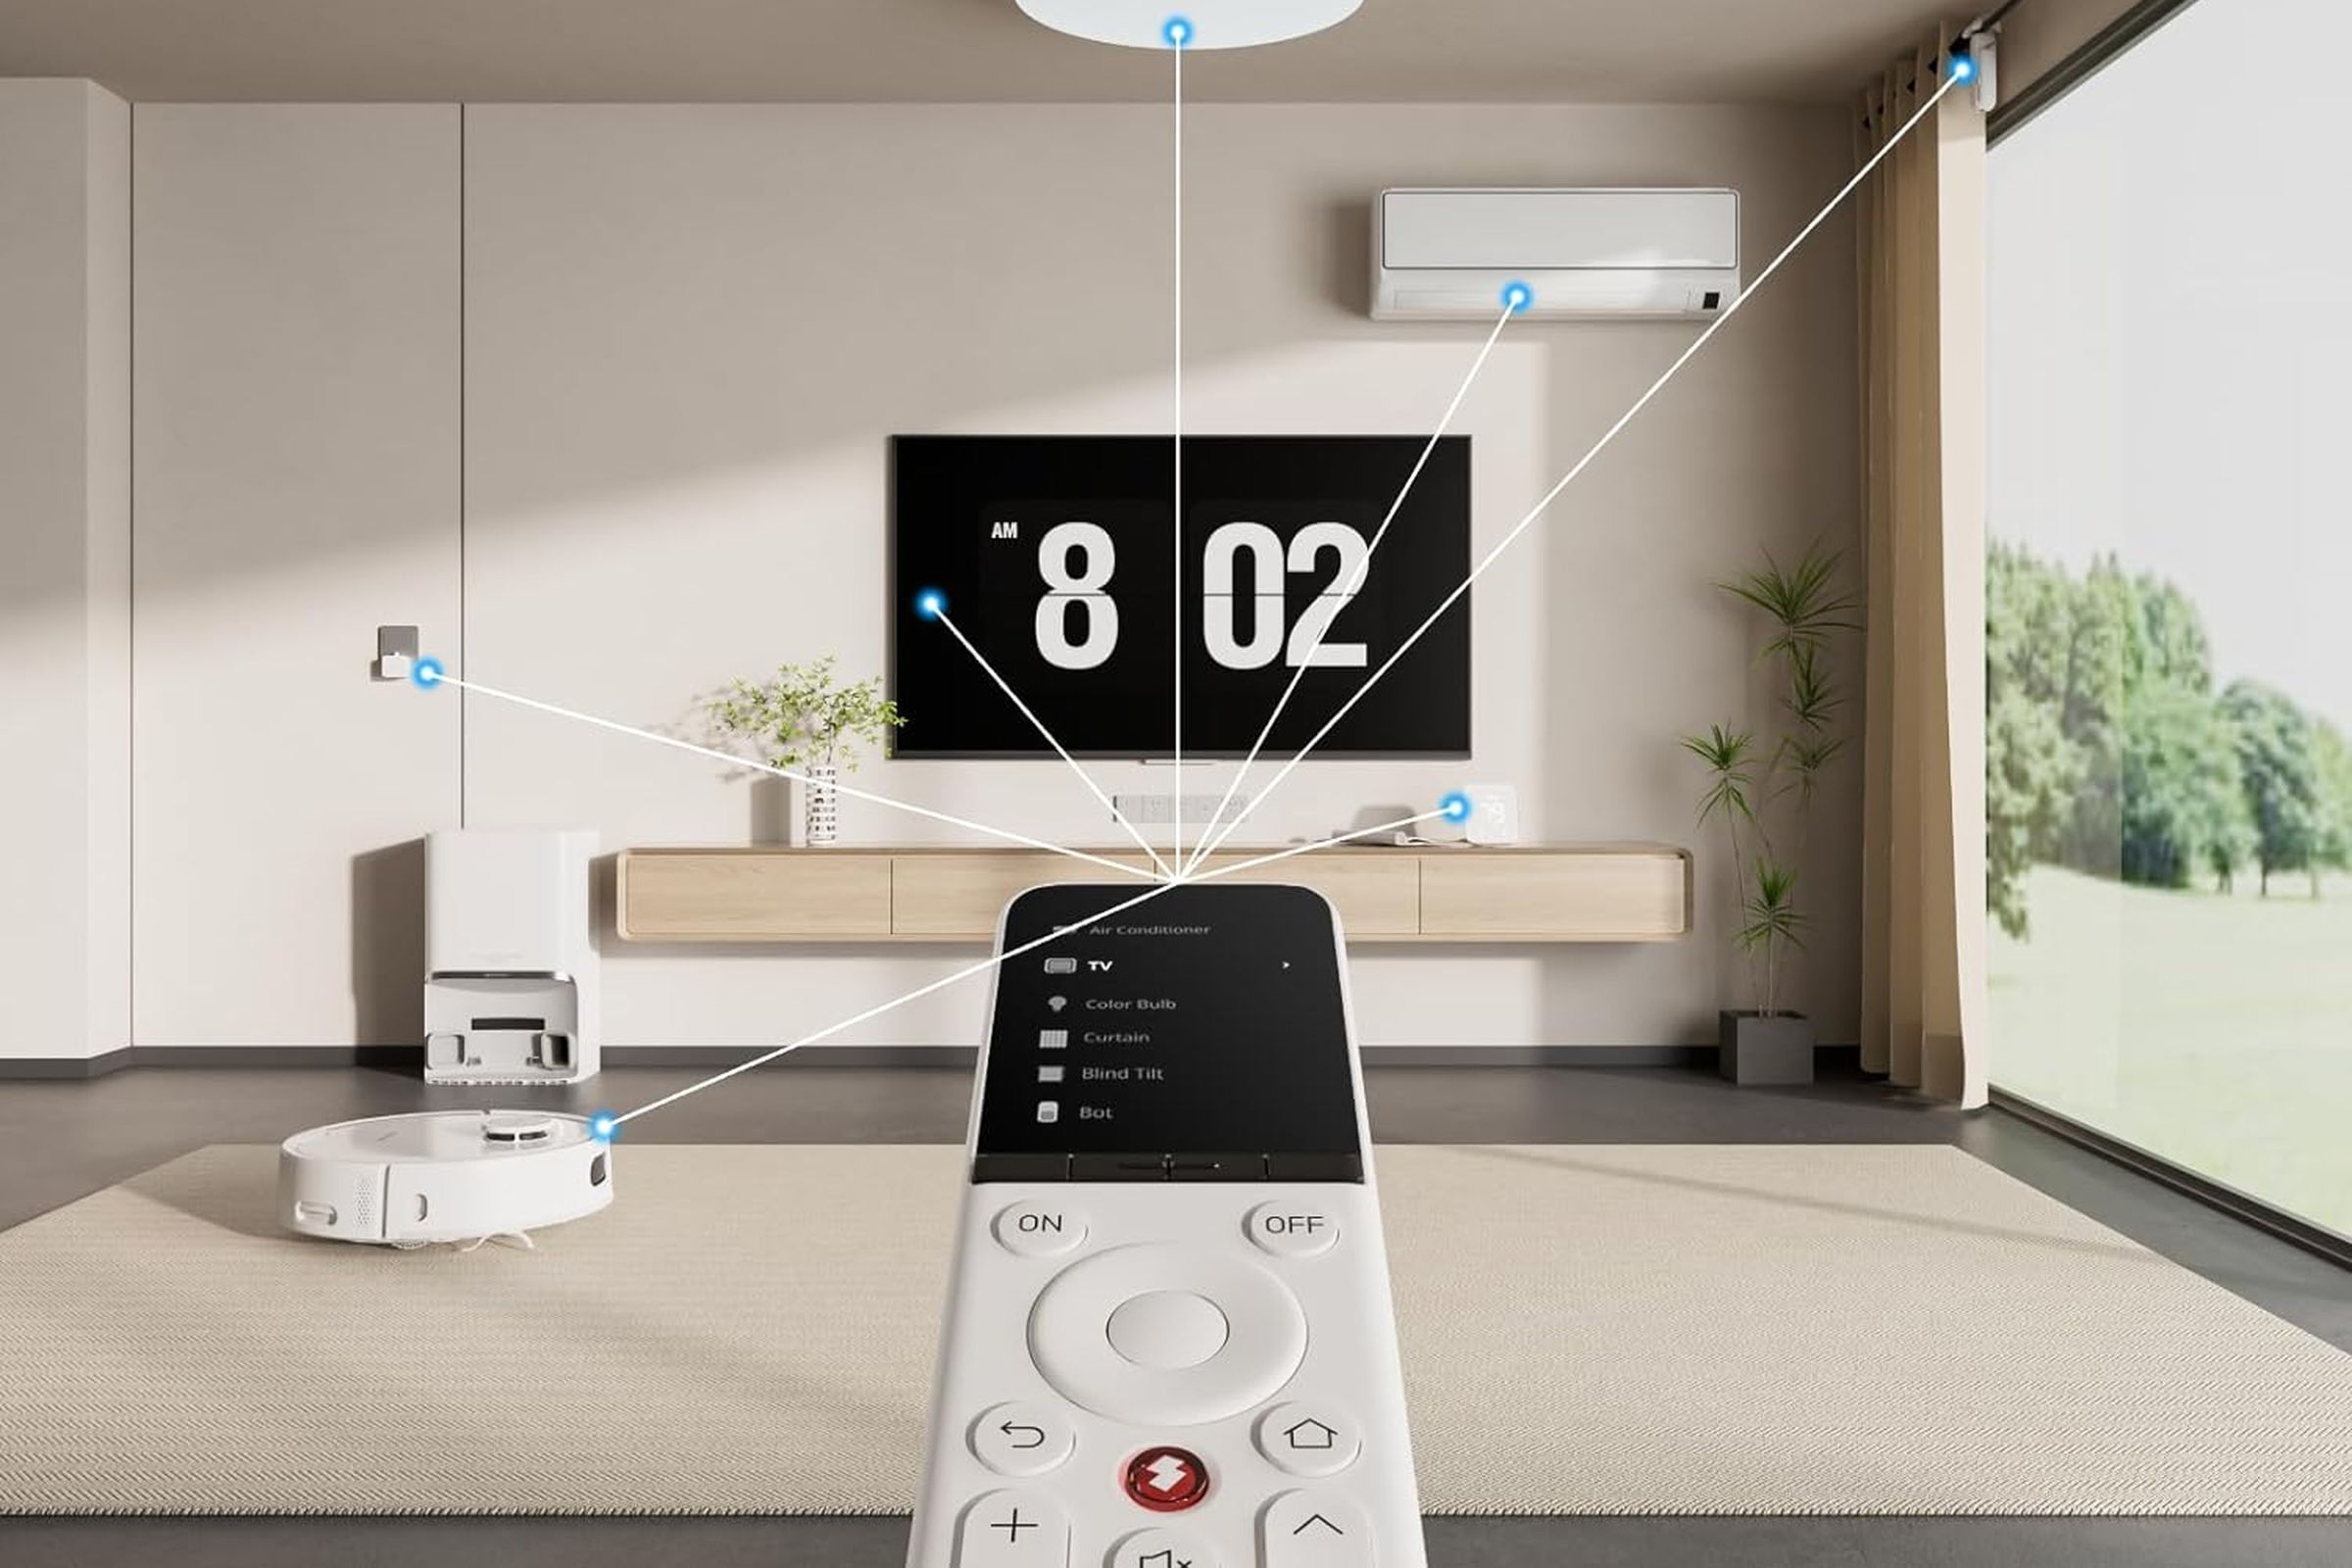 SwitchBot’s Universal Remote shown controlling several smart home devices.